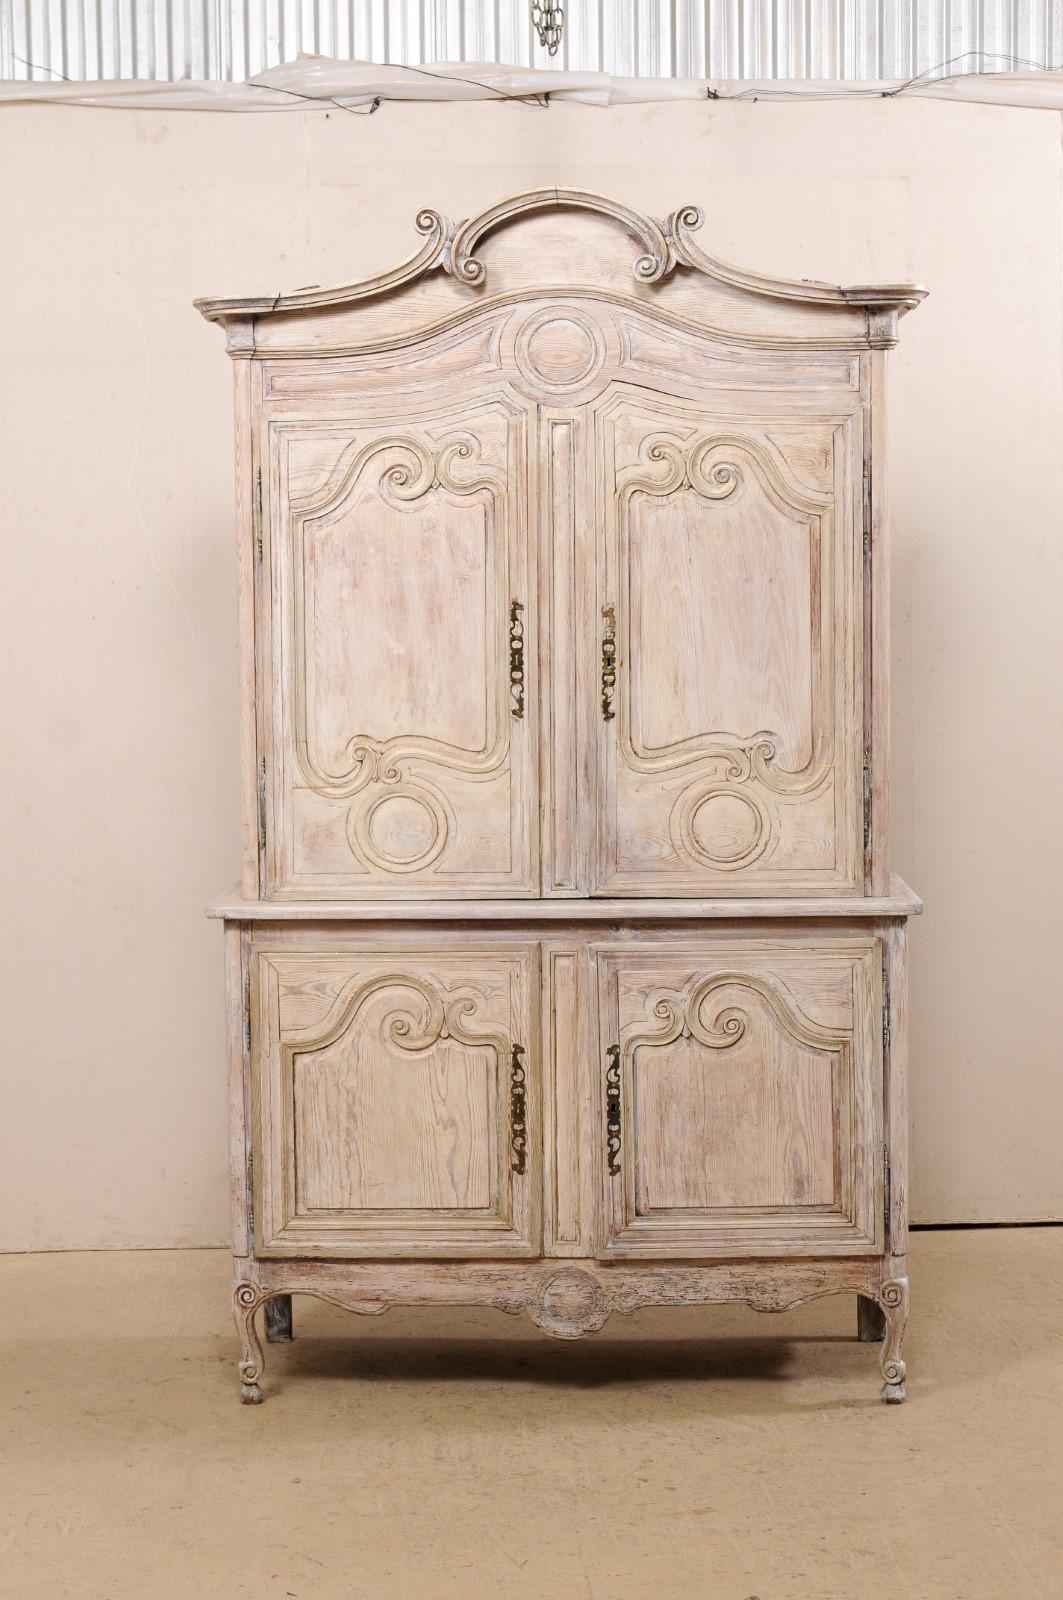 A tall French carved and painted wood storage cabinet from the early 19th century. This antique buffet à deux-corps from France features a delicately arched and molded center top pediment with curly volute accents, a pair of upper decoratively